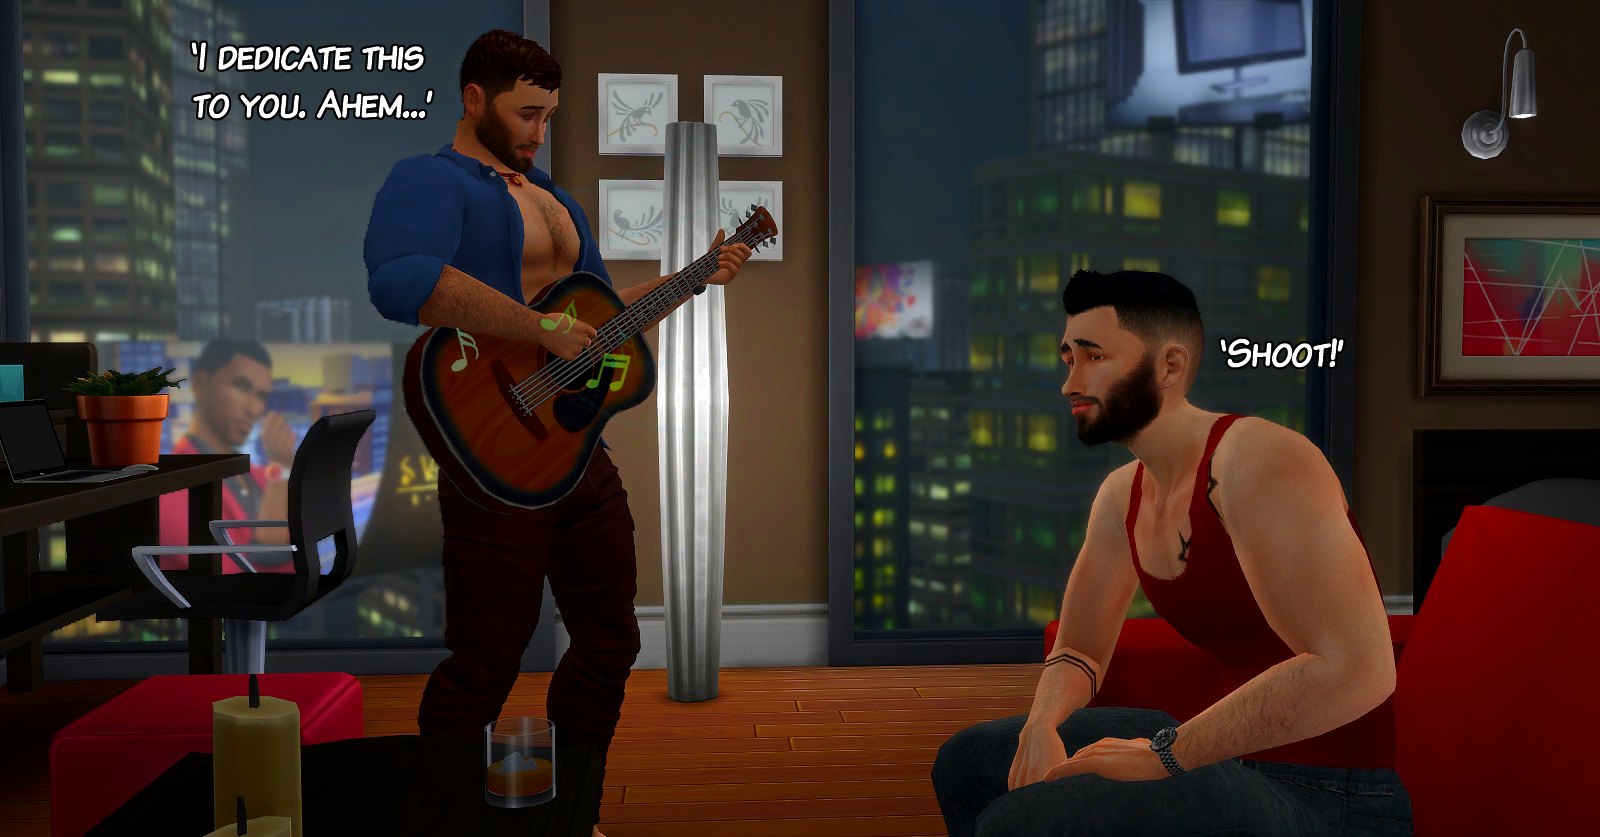 [The Lockdown] Day 21 - Part 1/4 - Gay Stories 4 Sims 